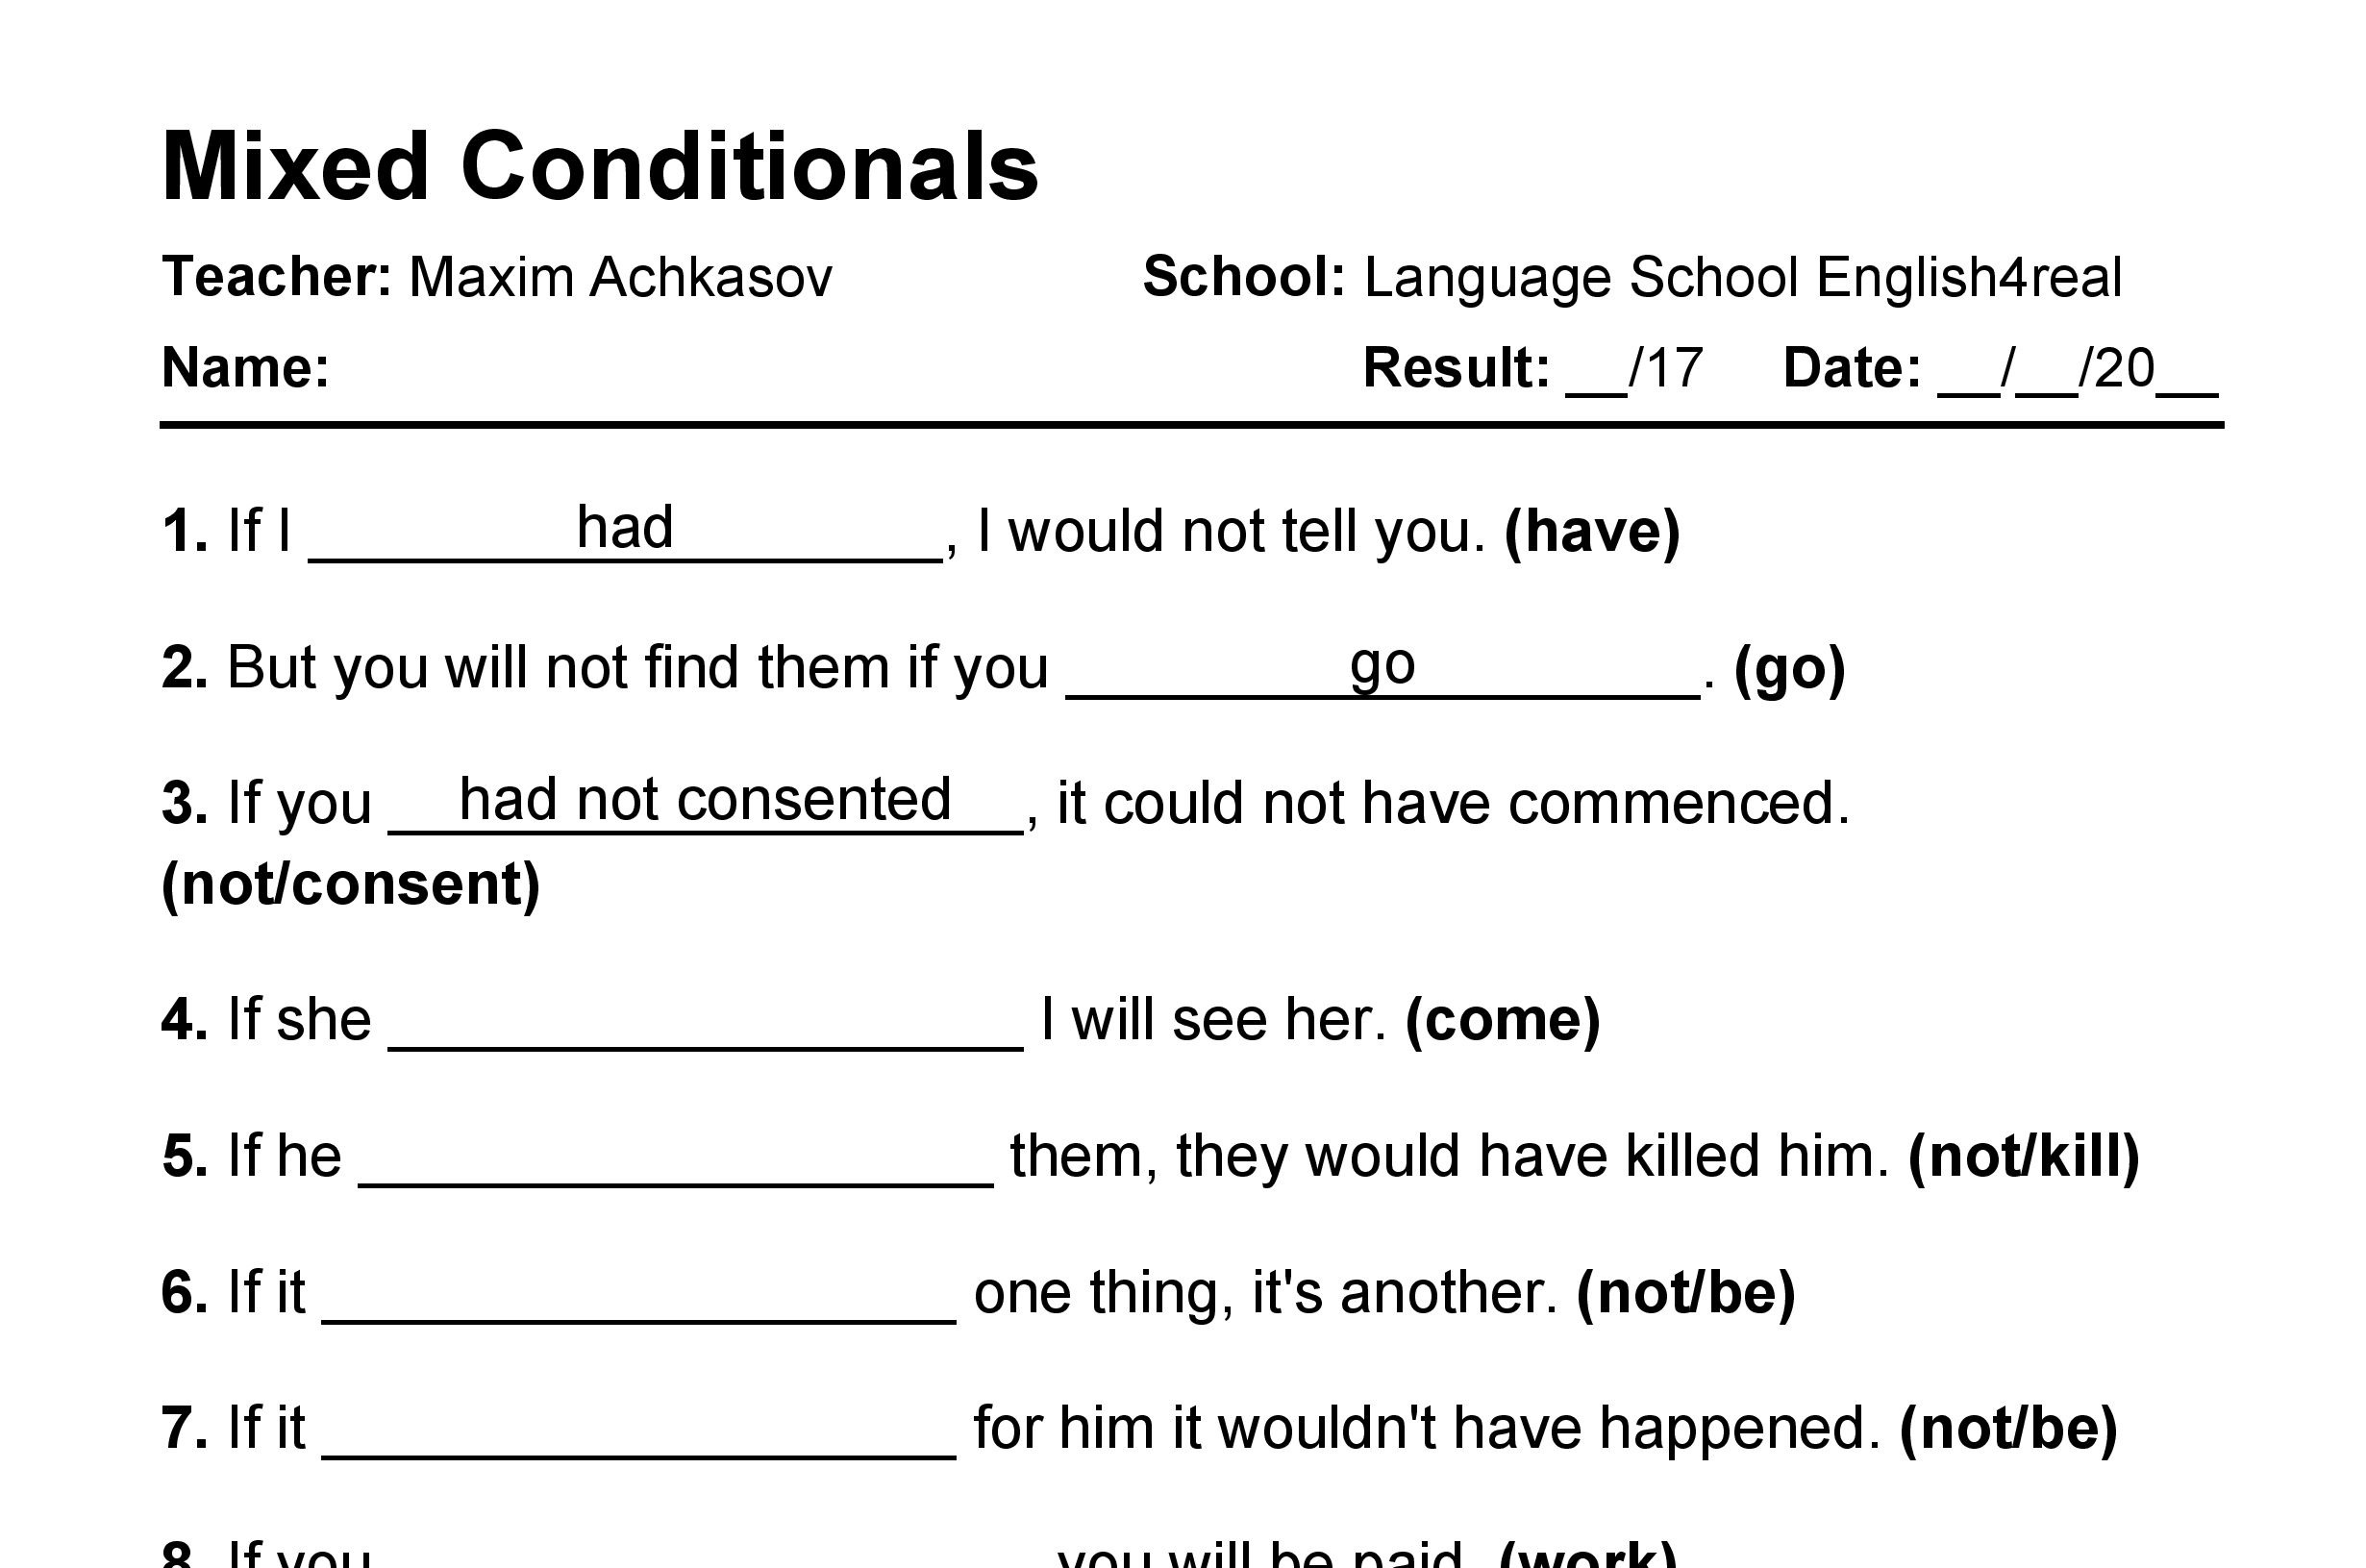 English grammar fill in the blanks exercises with answers in PDF - Mixed Conditionals